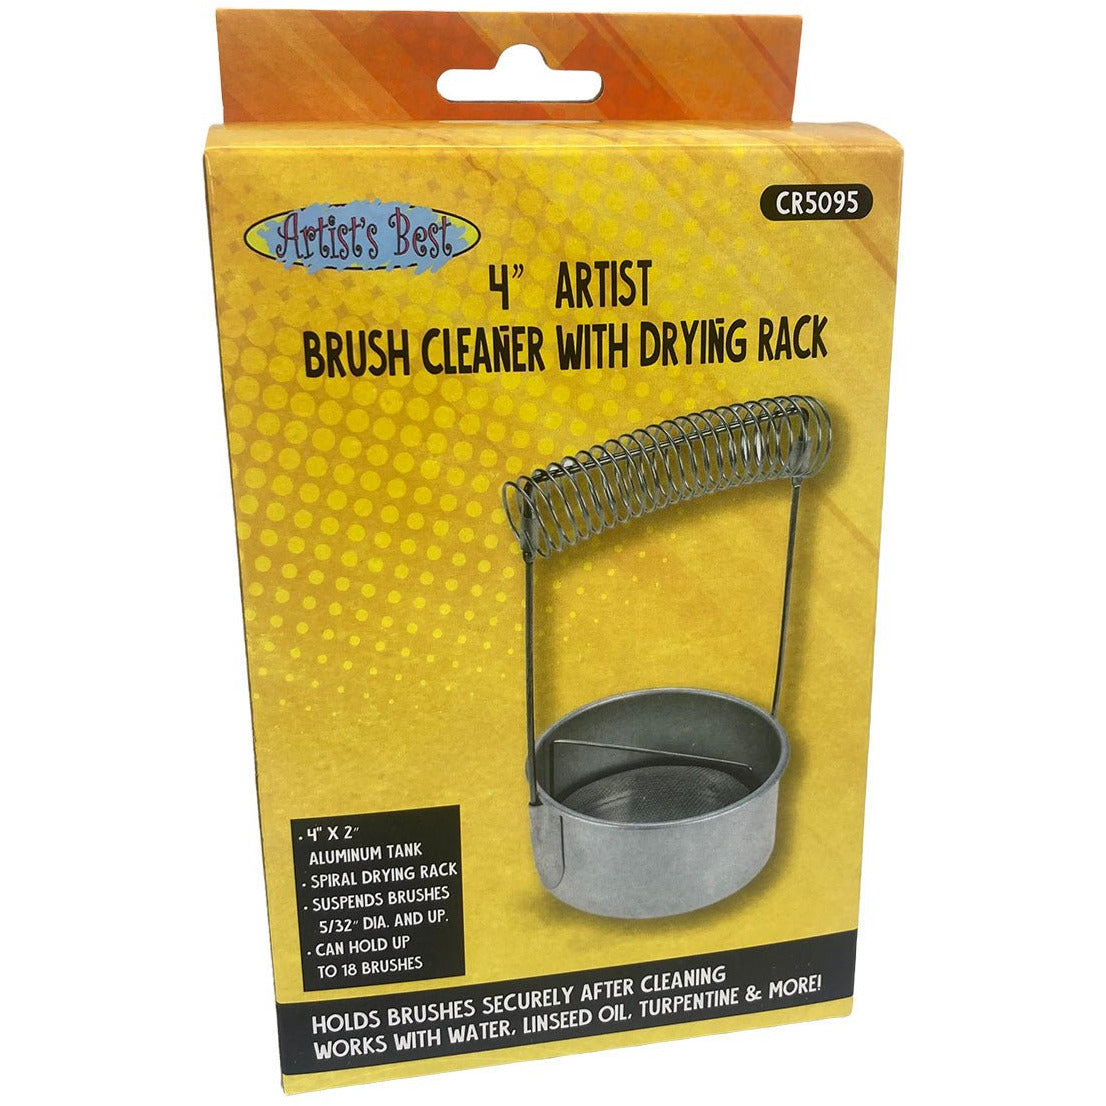 Artist's Aluminum Brush Holder and Washing Stand - CR-05095 - ToolUSA